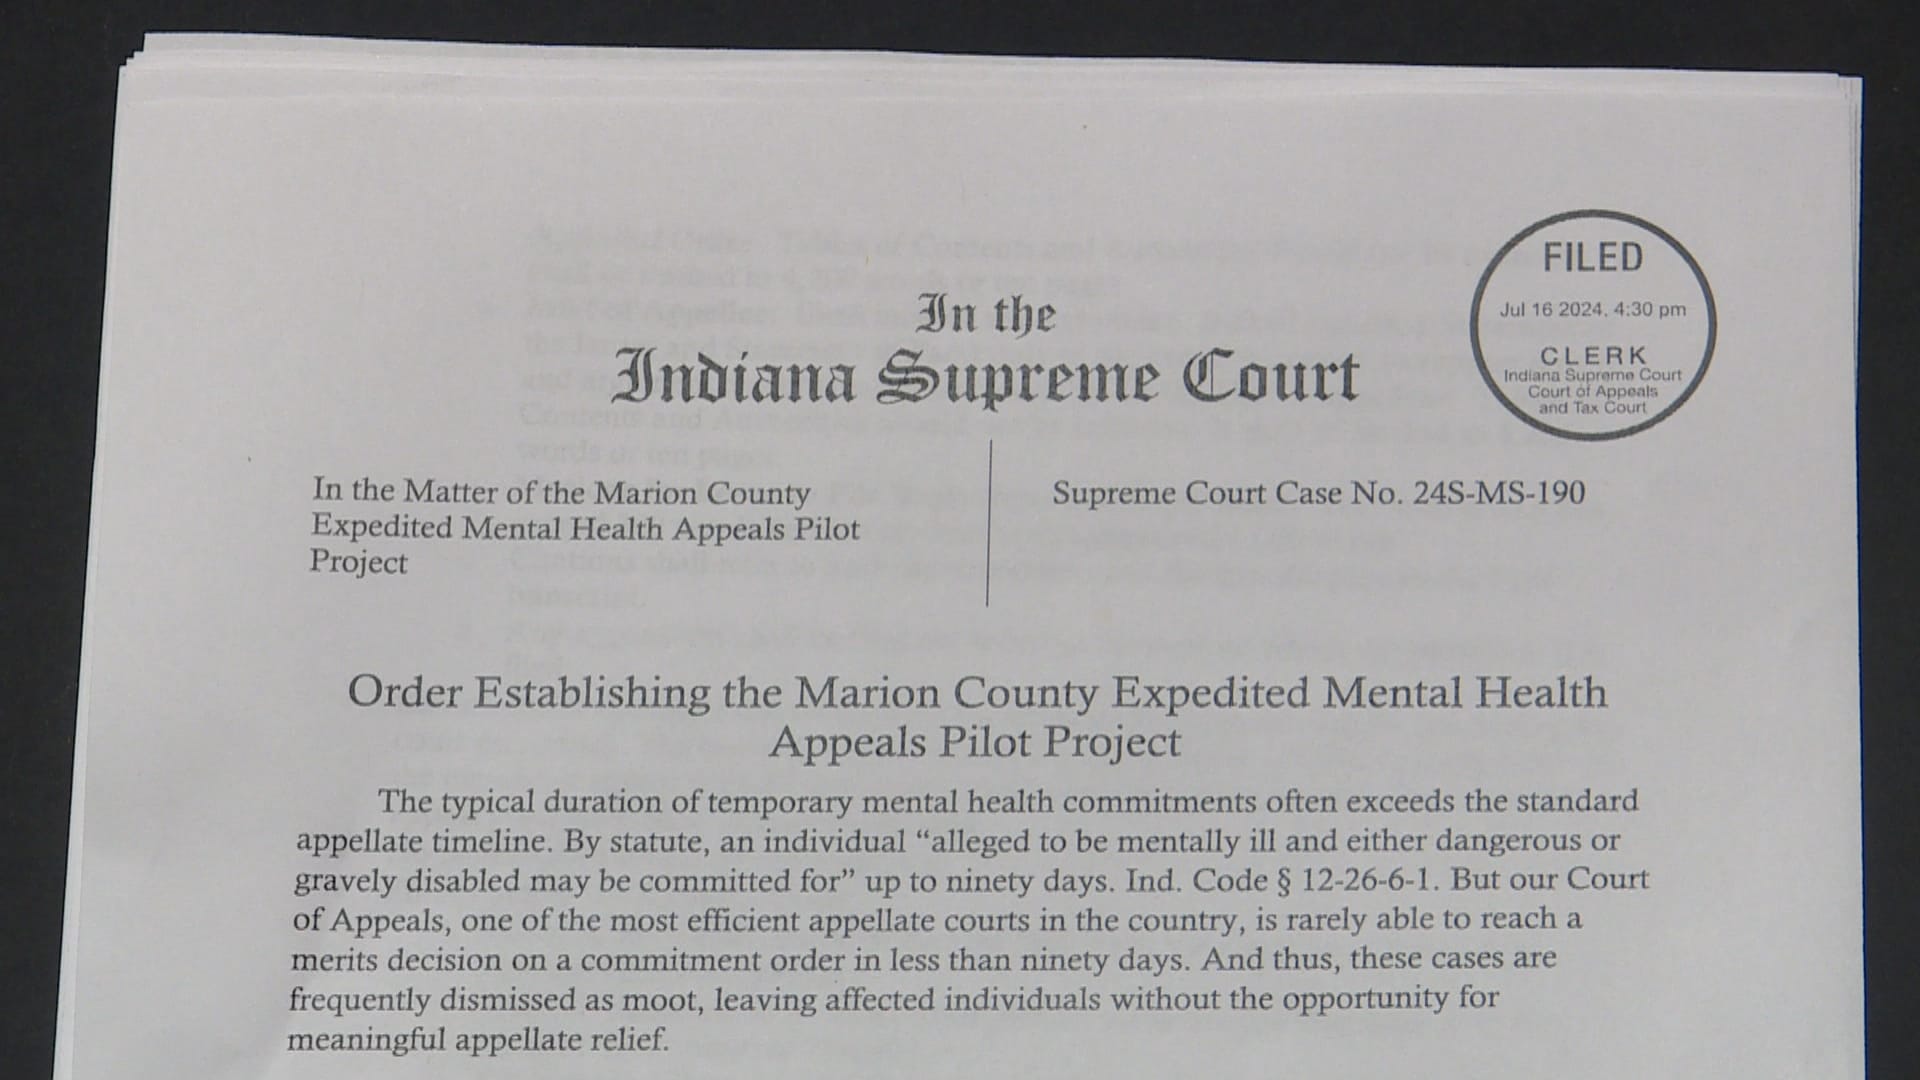 Indiana Supreme Court speeds up process for expedited mental health appeals